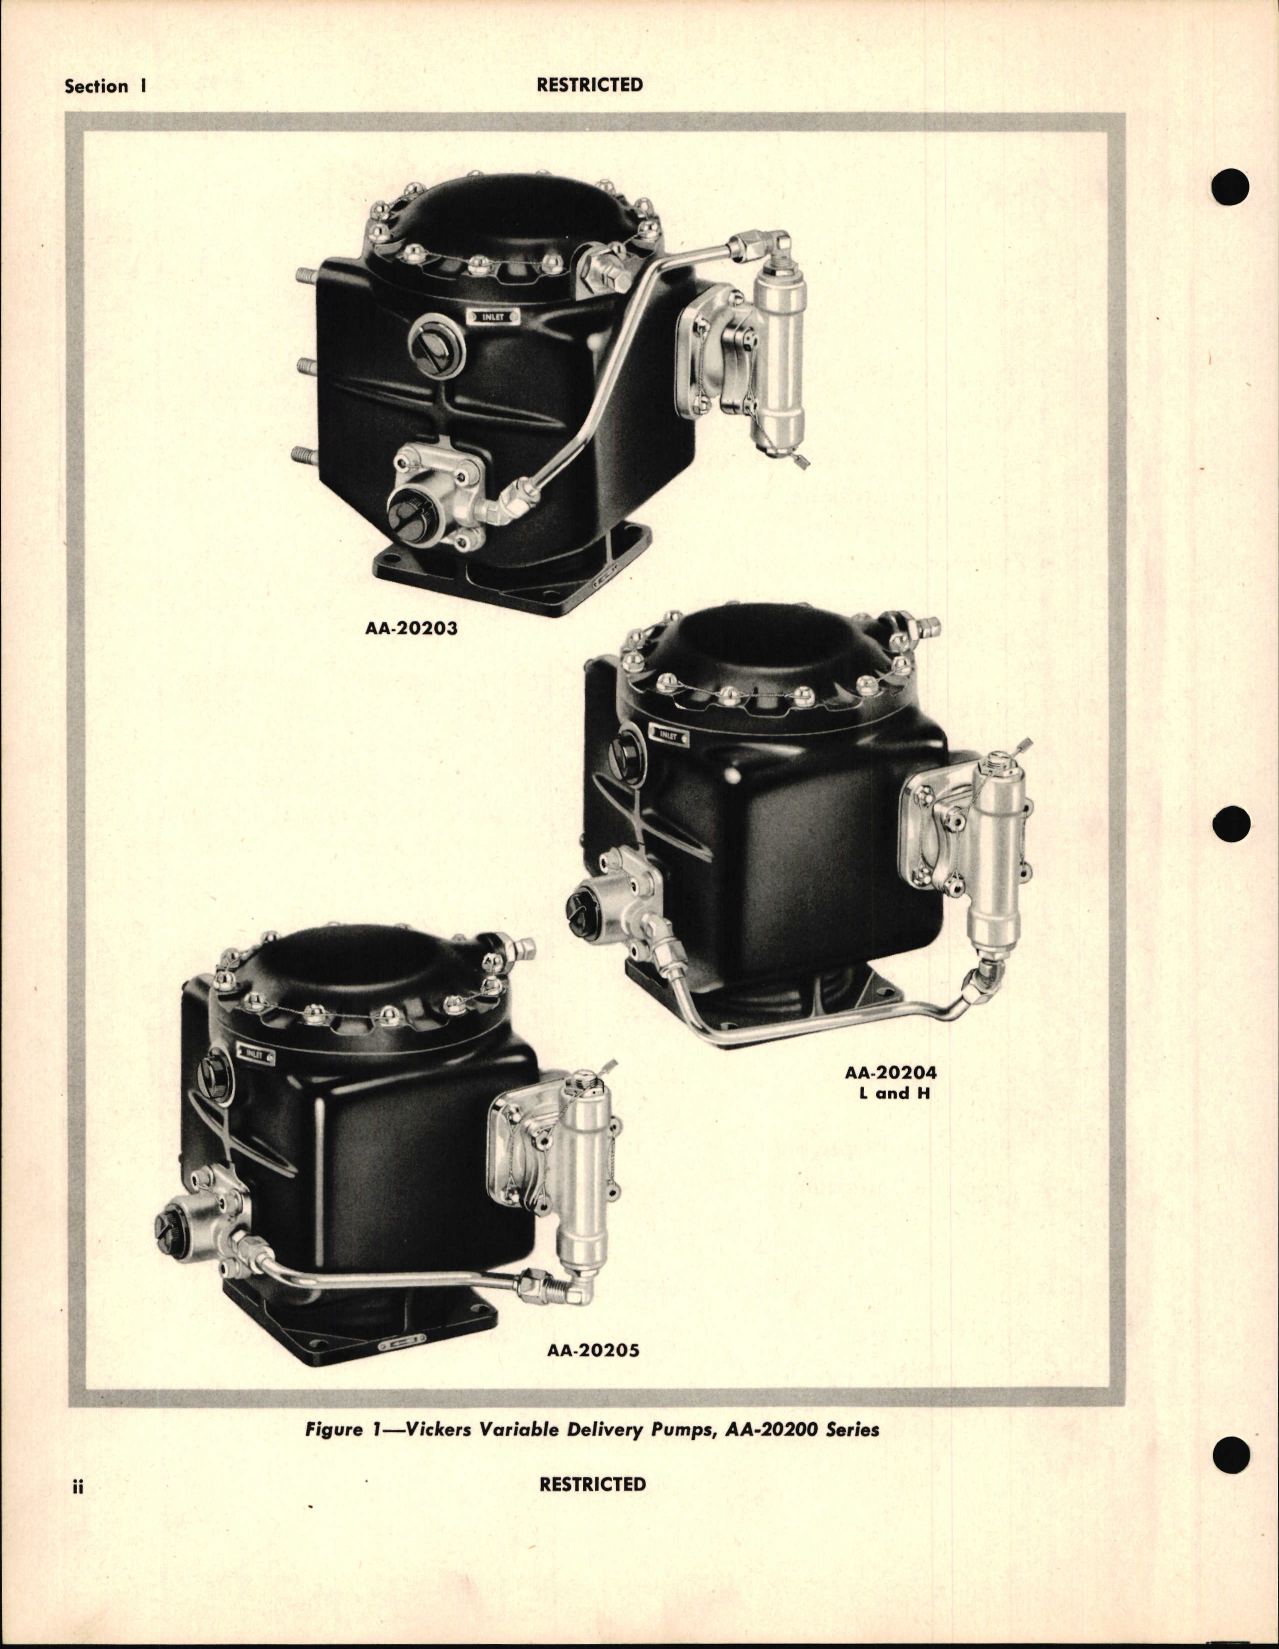 Sample page 6 from AirCorps Library document: Handbook of Instructions with Parts Catalog for Variable Delivery Pumps AA-20200 Series